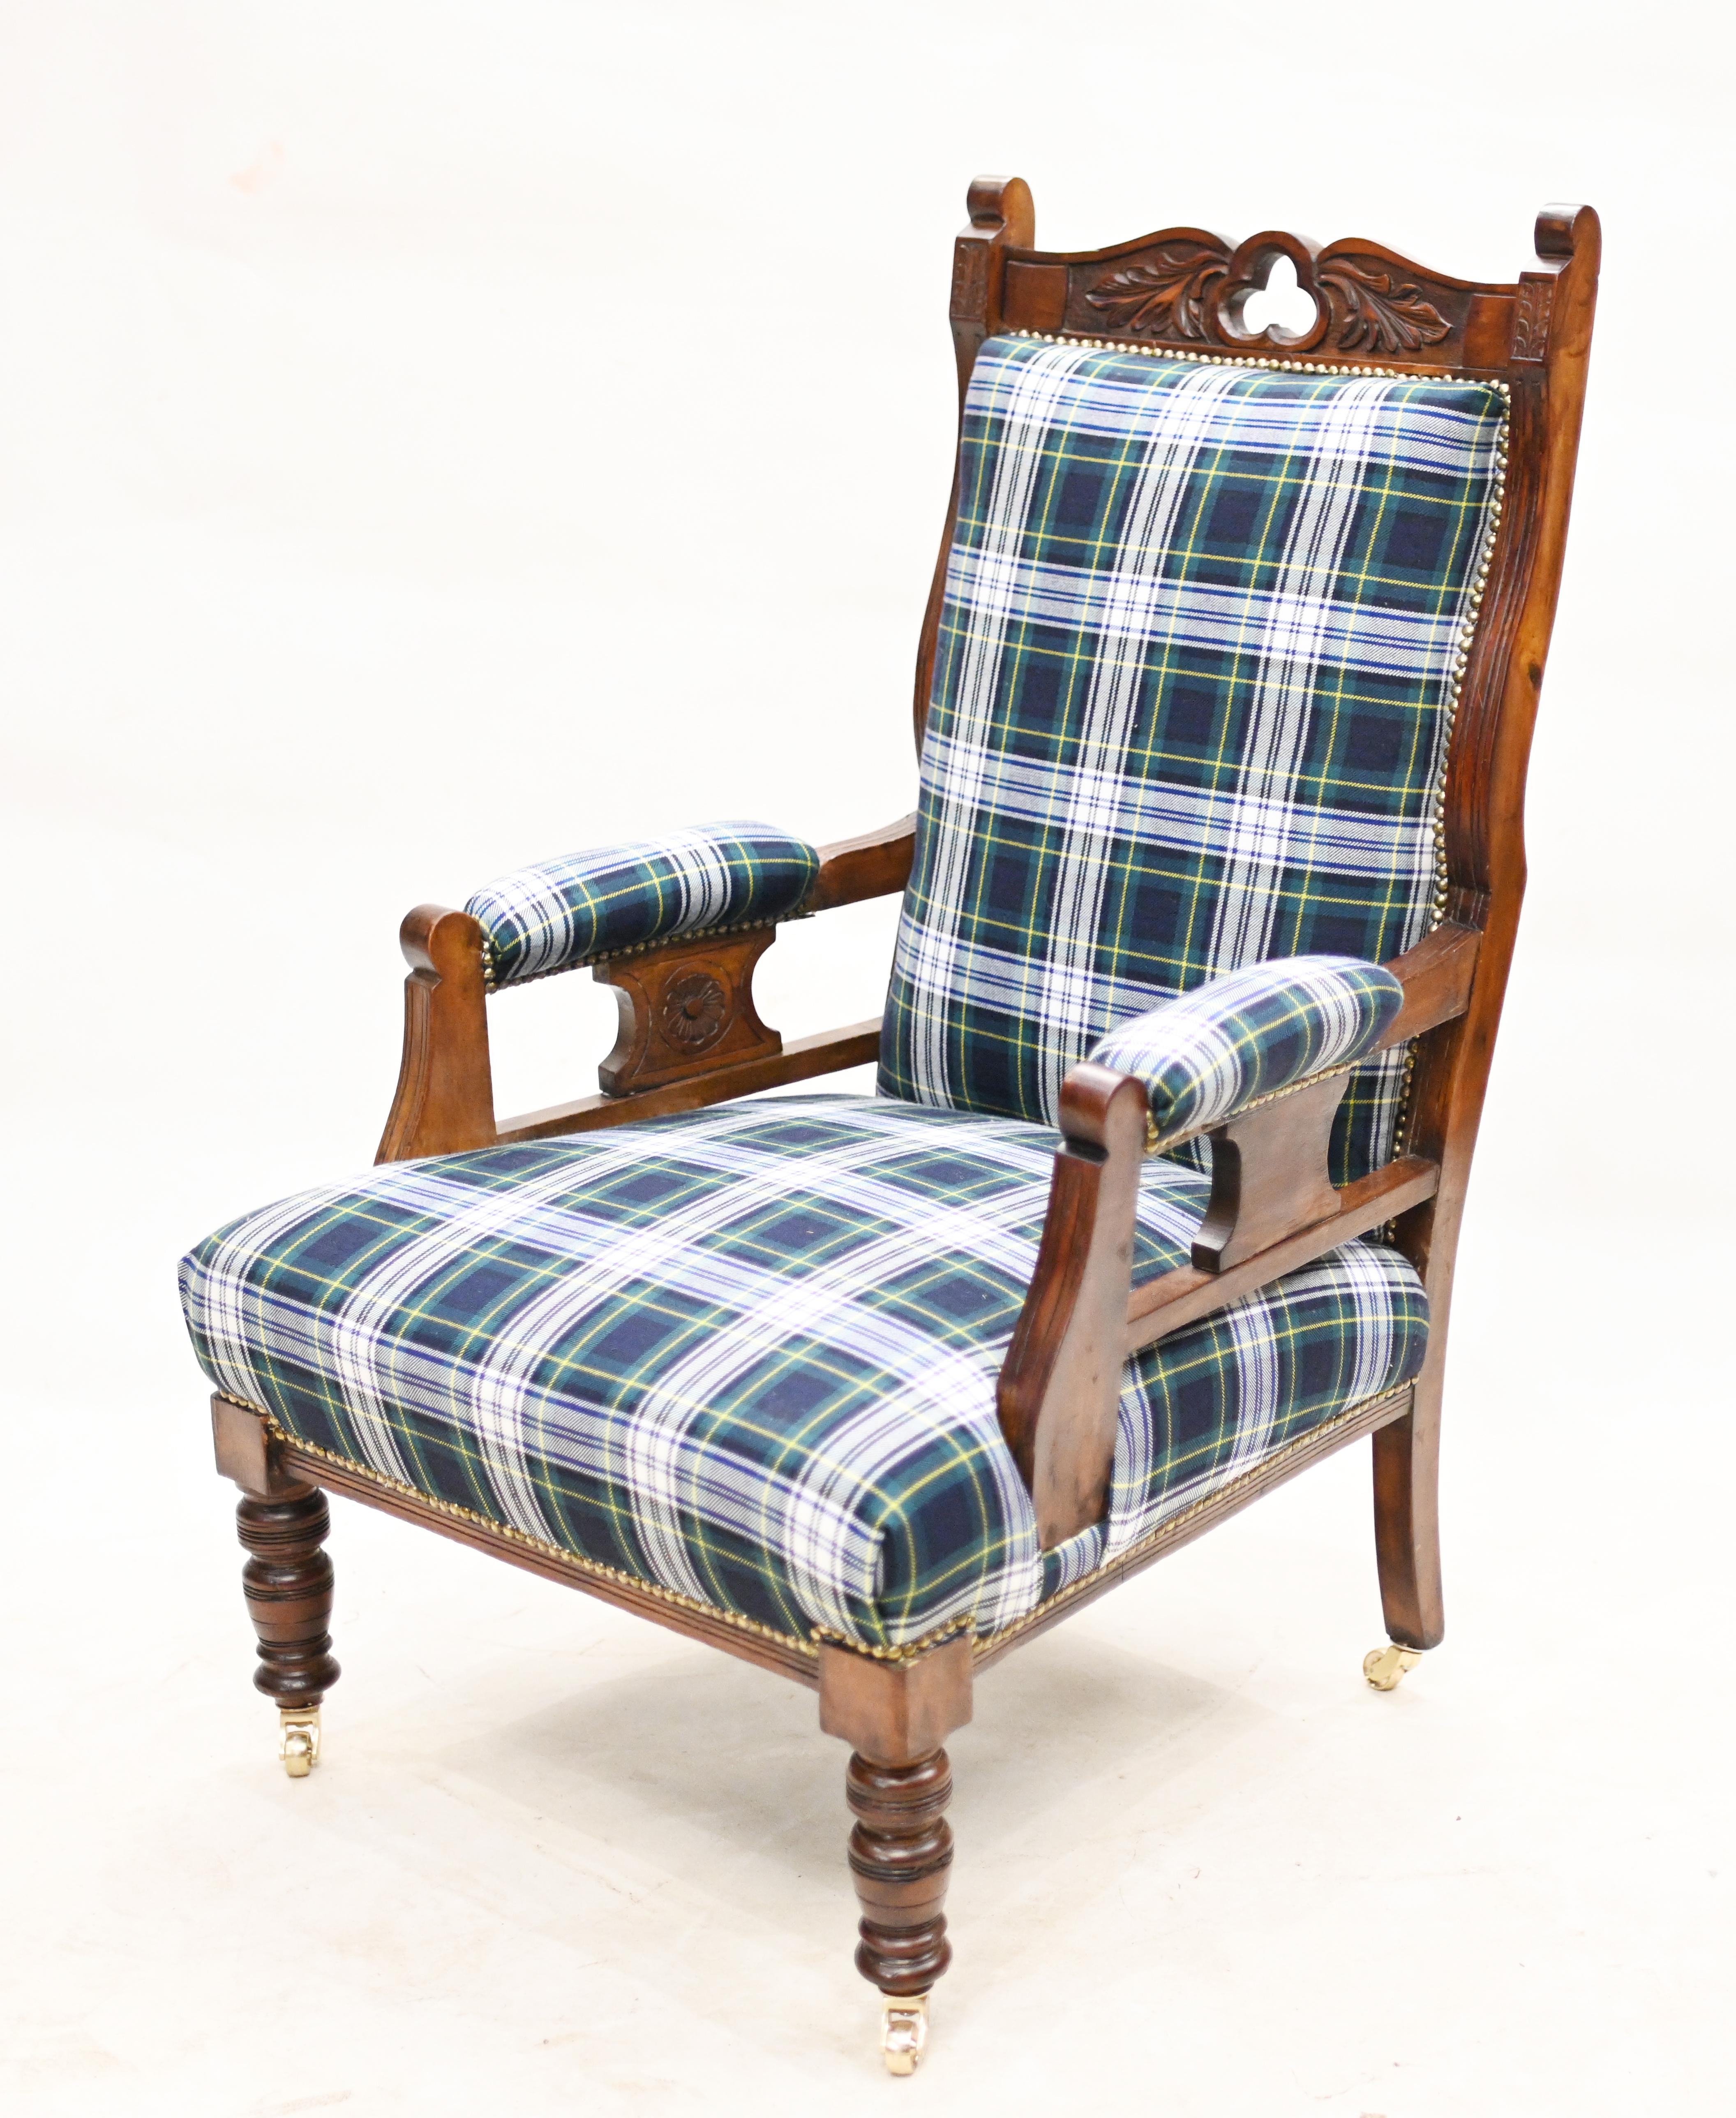 Gorgeous Edwardian arm chair in mahogany
Very comfortable to sit in with cushioned arms and back
Of course recently re-upholstered with tartan print which really livens up the look
Circa 1910 and we bought this from a private residence in London's